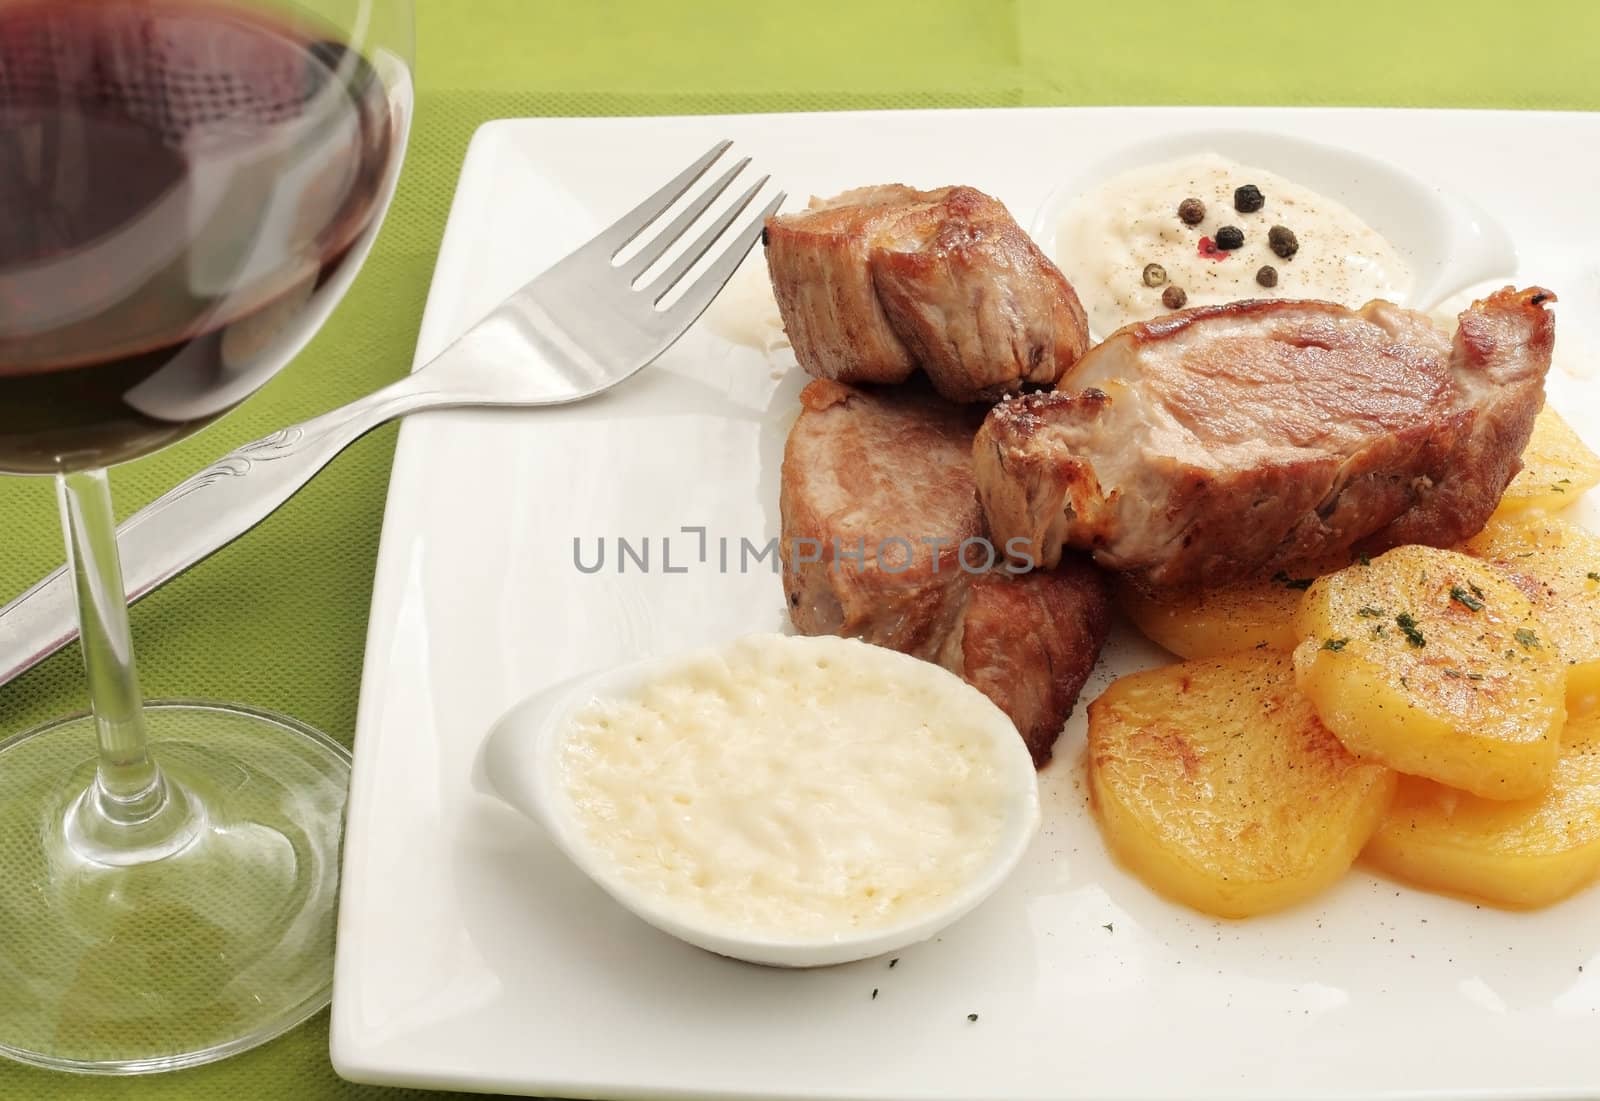 chopped pork sirloin steak with pepper sauce accompanied by potatoes bakers and glass of red wine